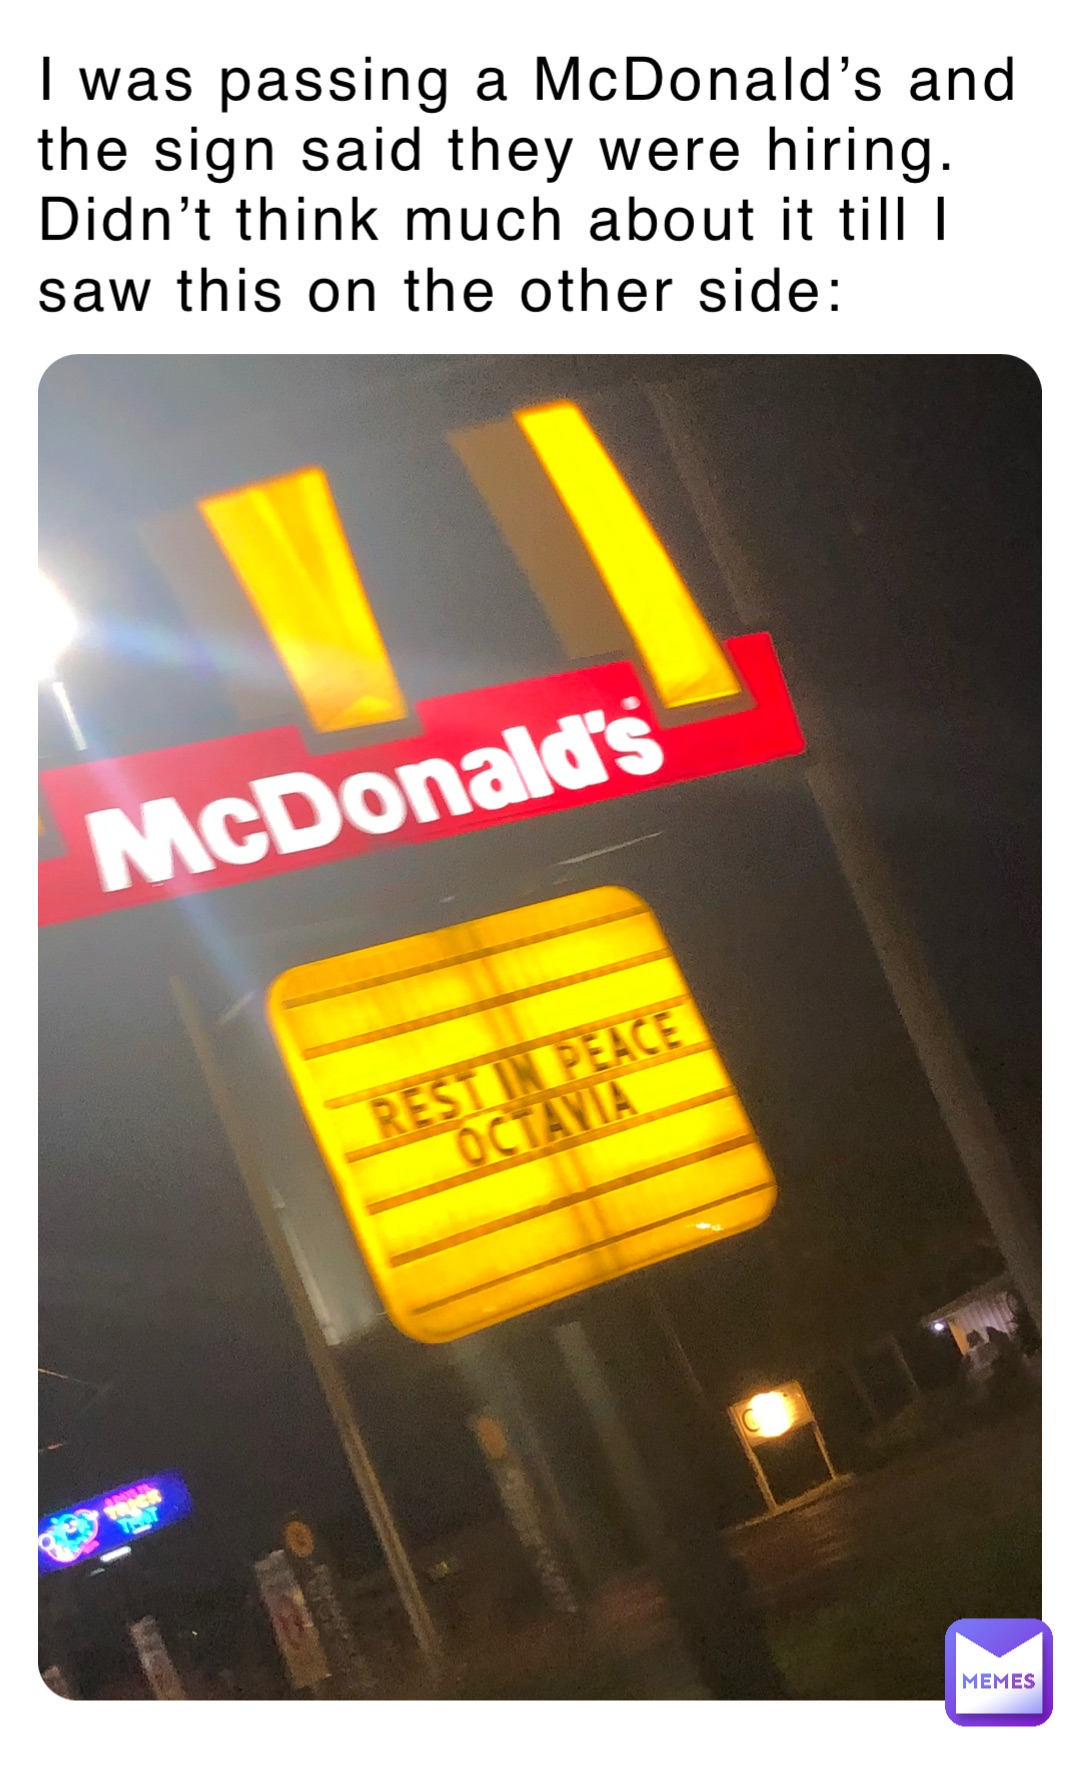 I was passing a McDonald’s and the sign said they were hiring. Didn’t think much about it till I saw this on the other side: